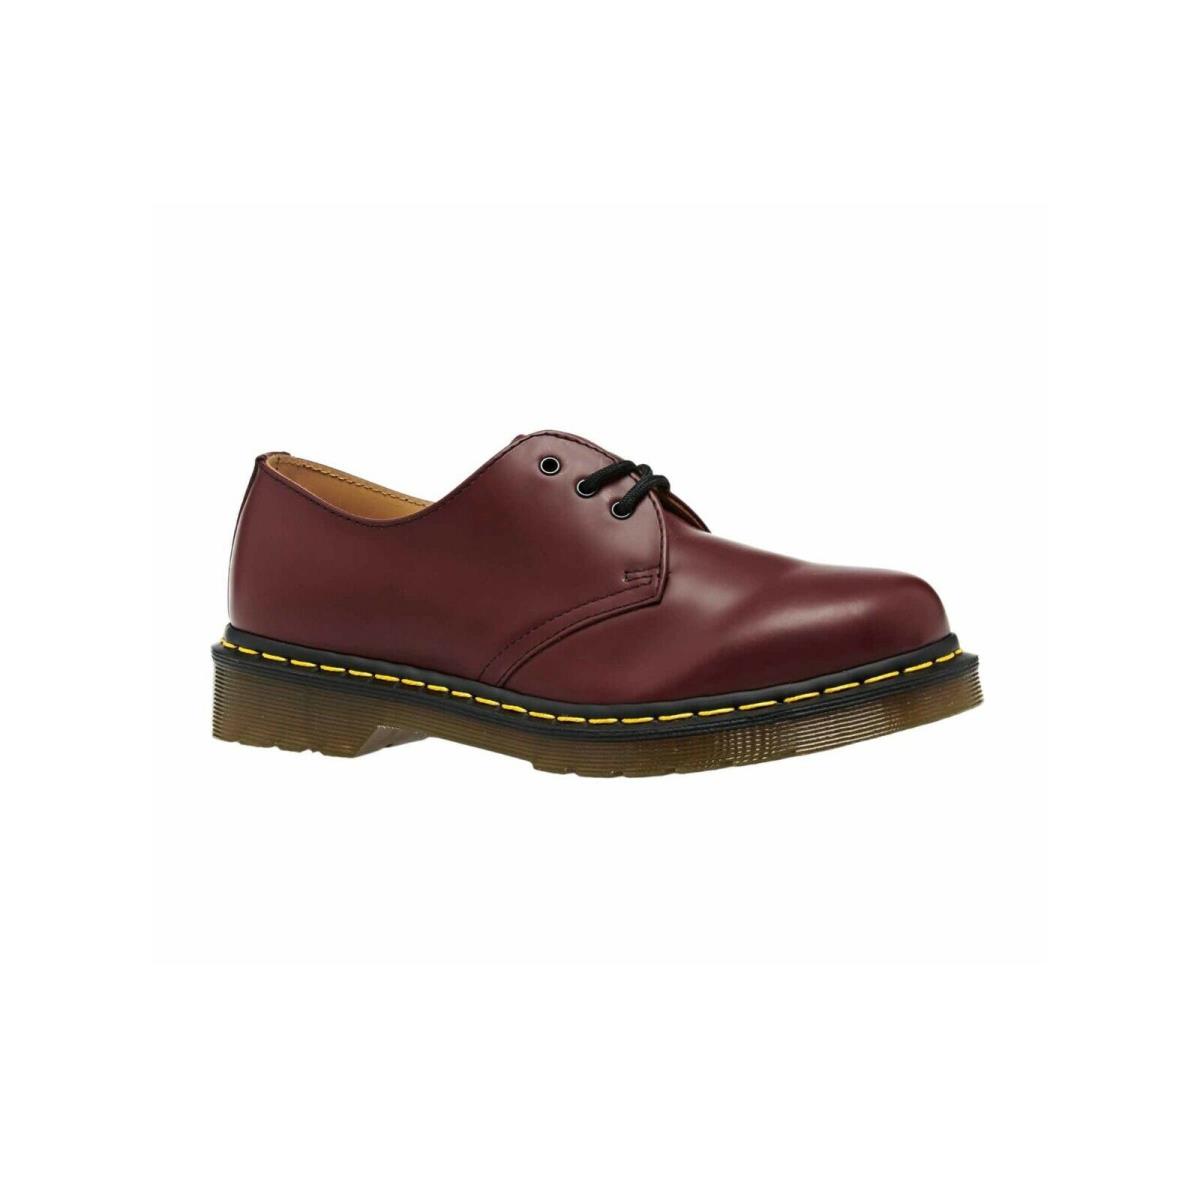 Dr Martens 1461 Cherry Red Smooth Leather Classic Men Women Platform Shoes